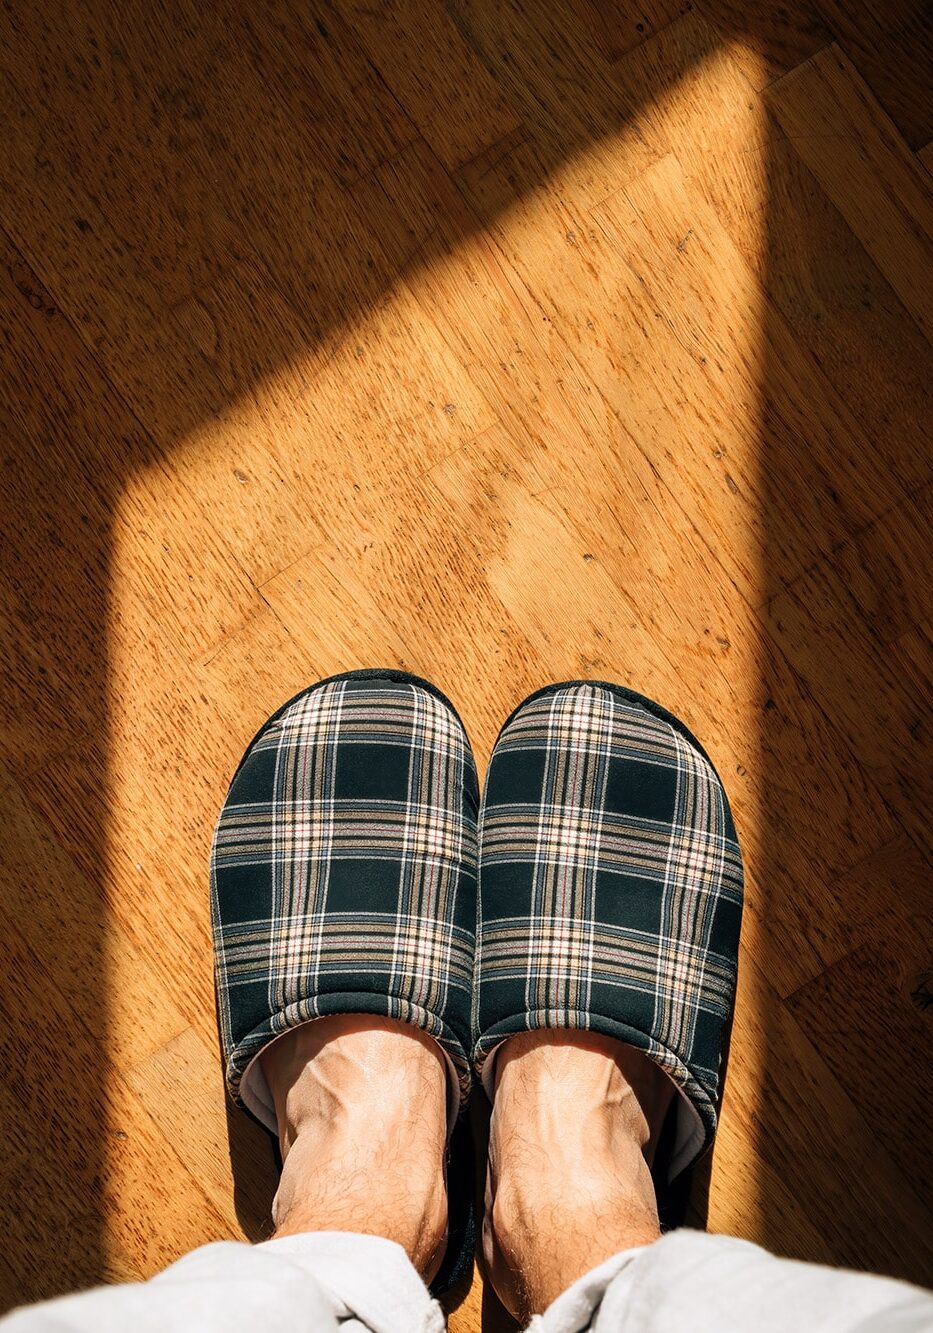 Top view of male feet wearing home slippers and standing on hardwood flooring in living room, copy space included